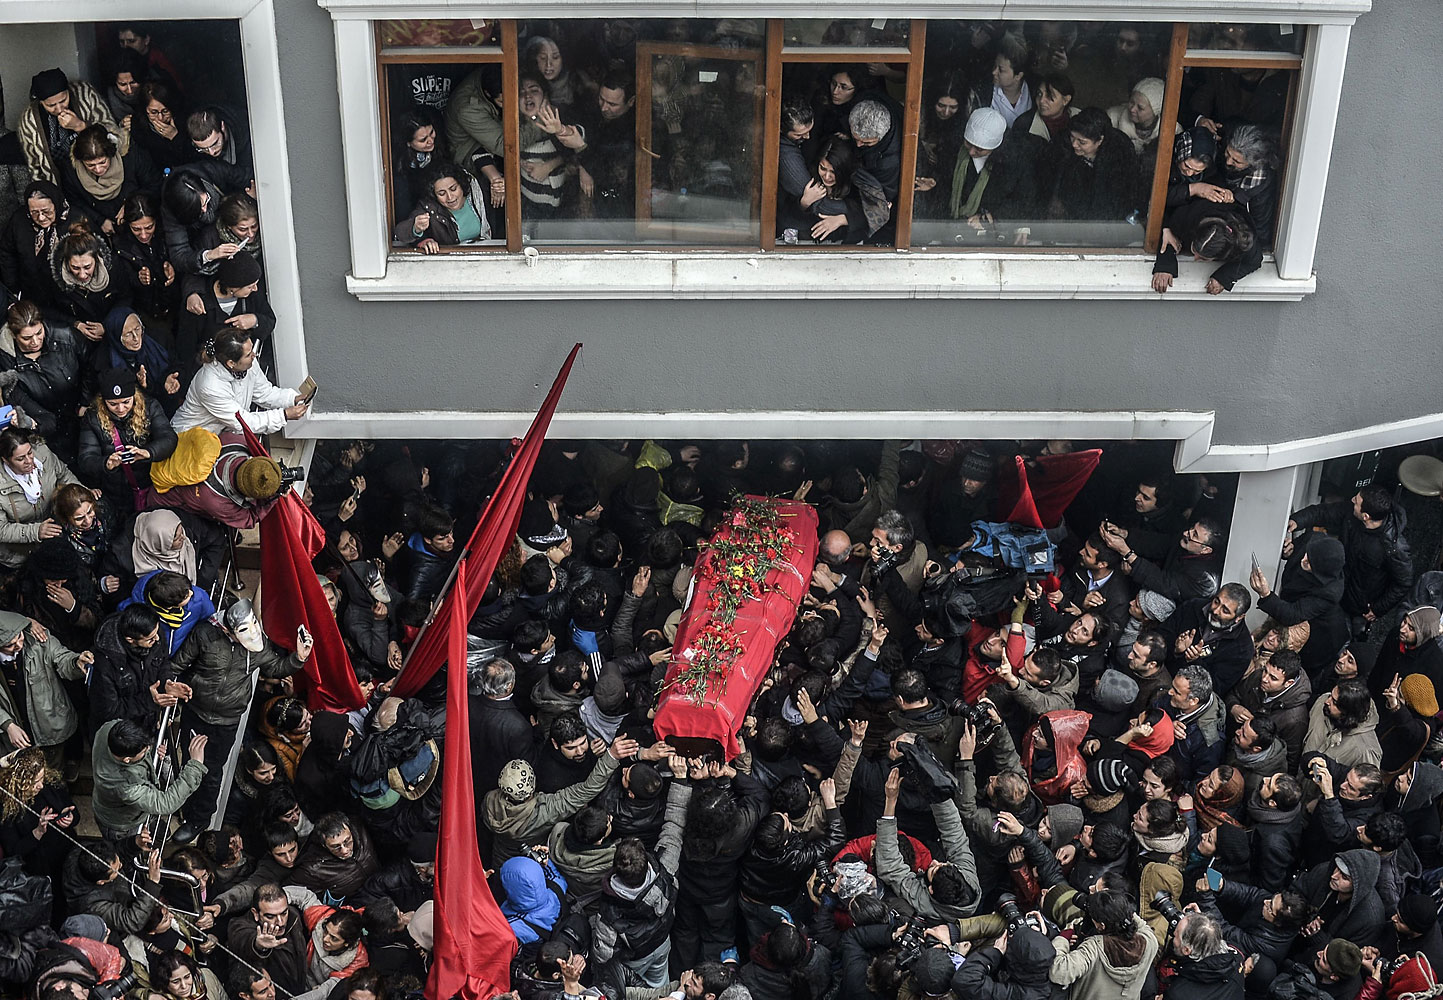 The coffin of Berkin Elvan is carried  on March 11, 2014, in Istanbul. Berkin Elvan, who has been in a coma since June 2013 after being struck in the head by a gas canister during a police crackdown on protesters, died earlier on the day. (Bulent Kilic—AFP/Getty Images)